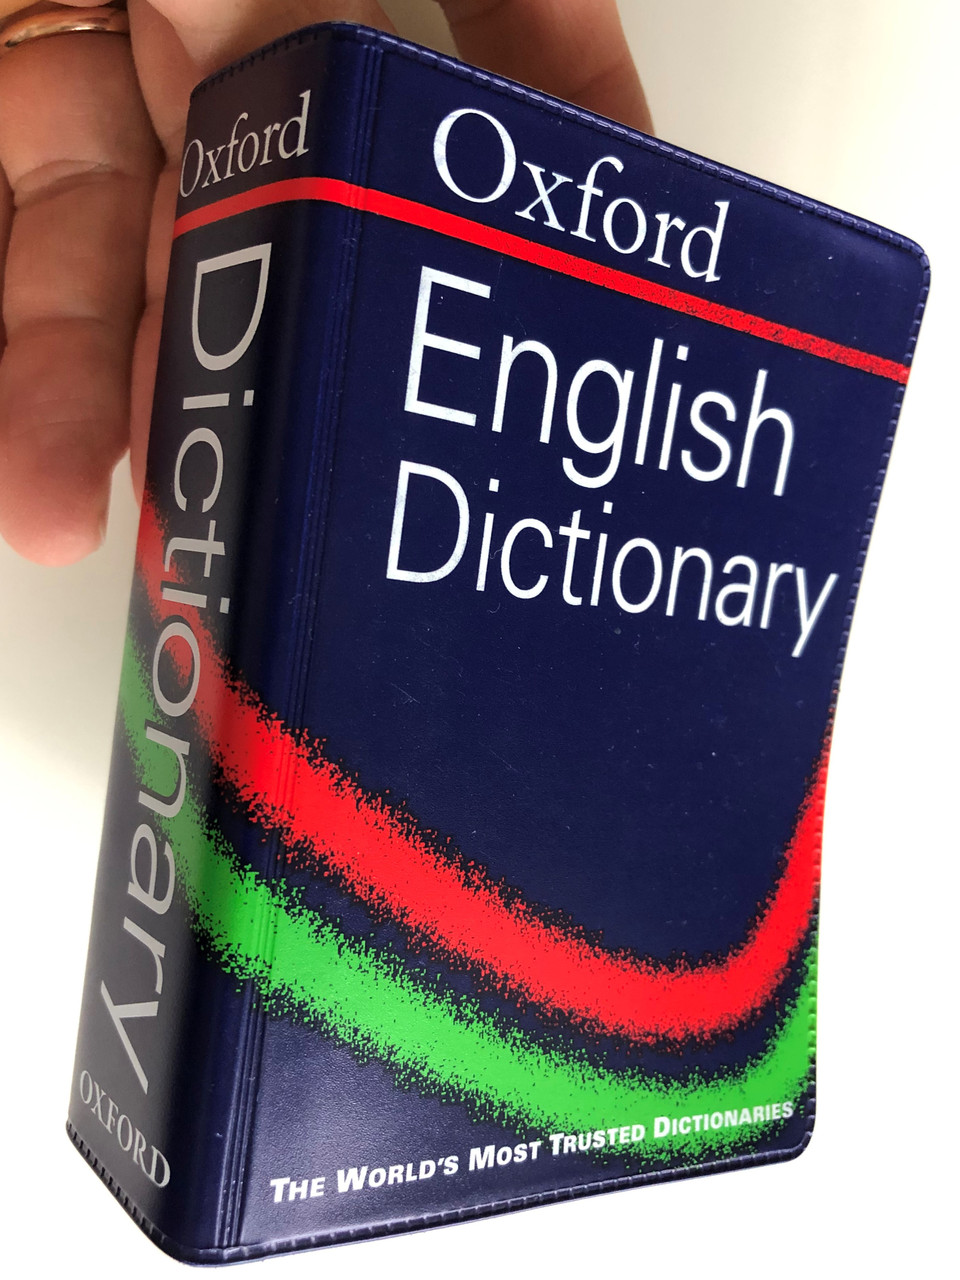 thesis meaning oxford english dictionary